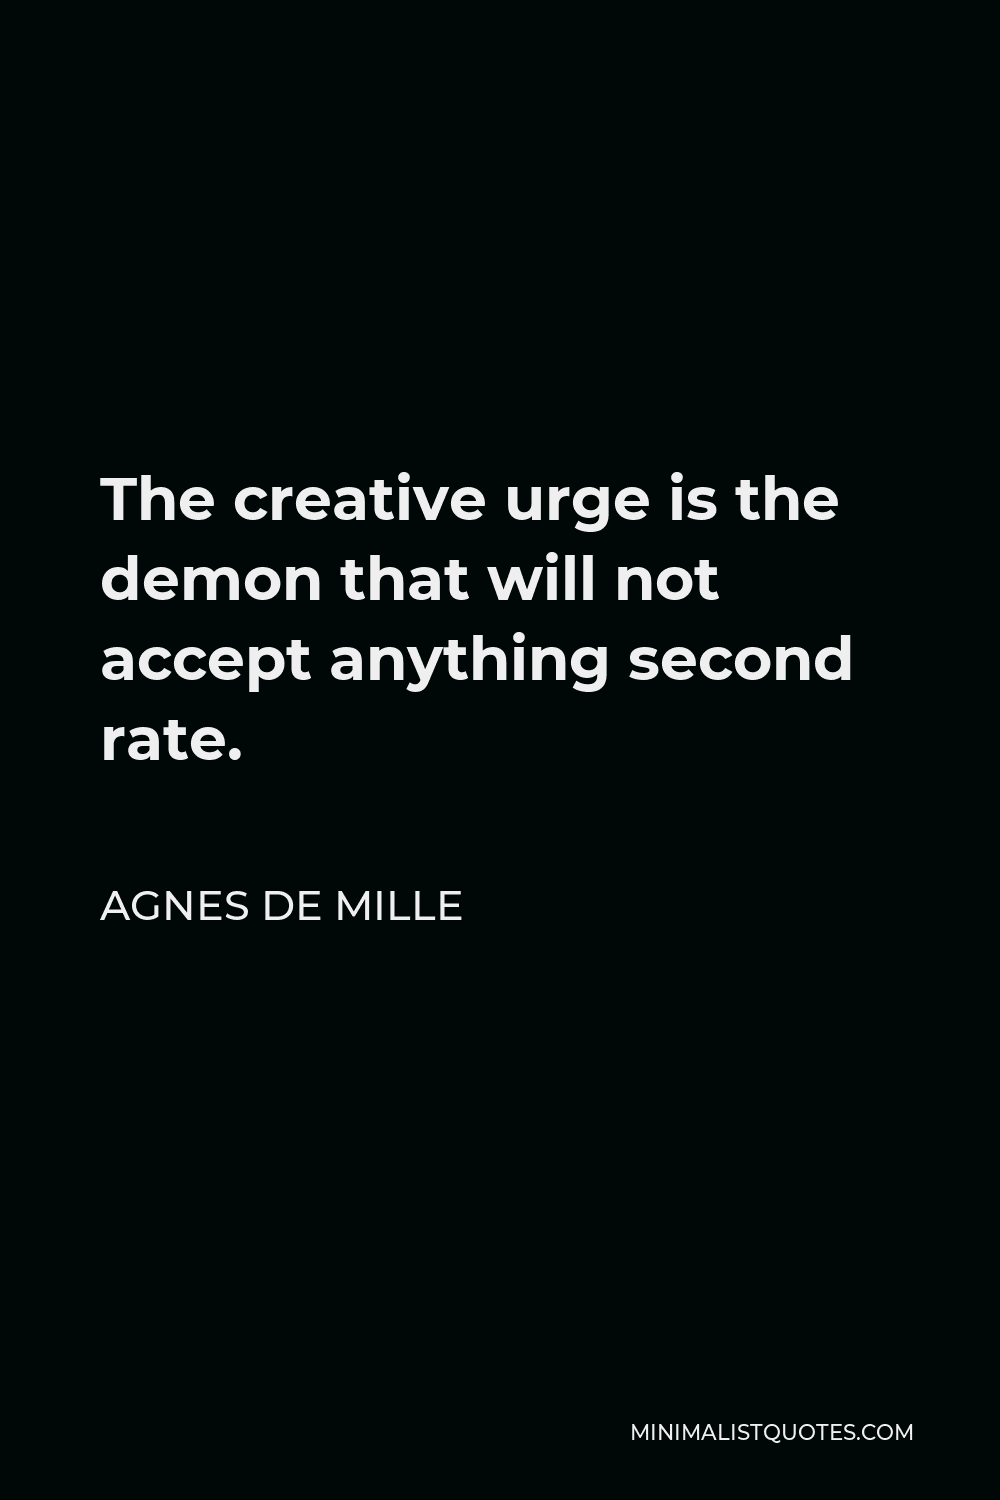 Agnes de Mille Quote - The creative urge is the demon that will not accept anything second rate.